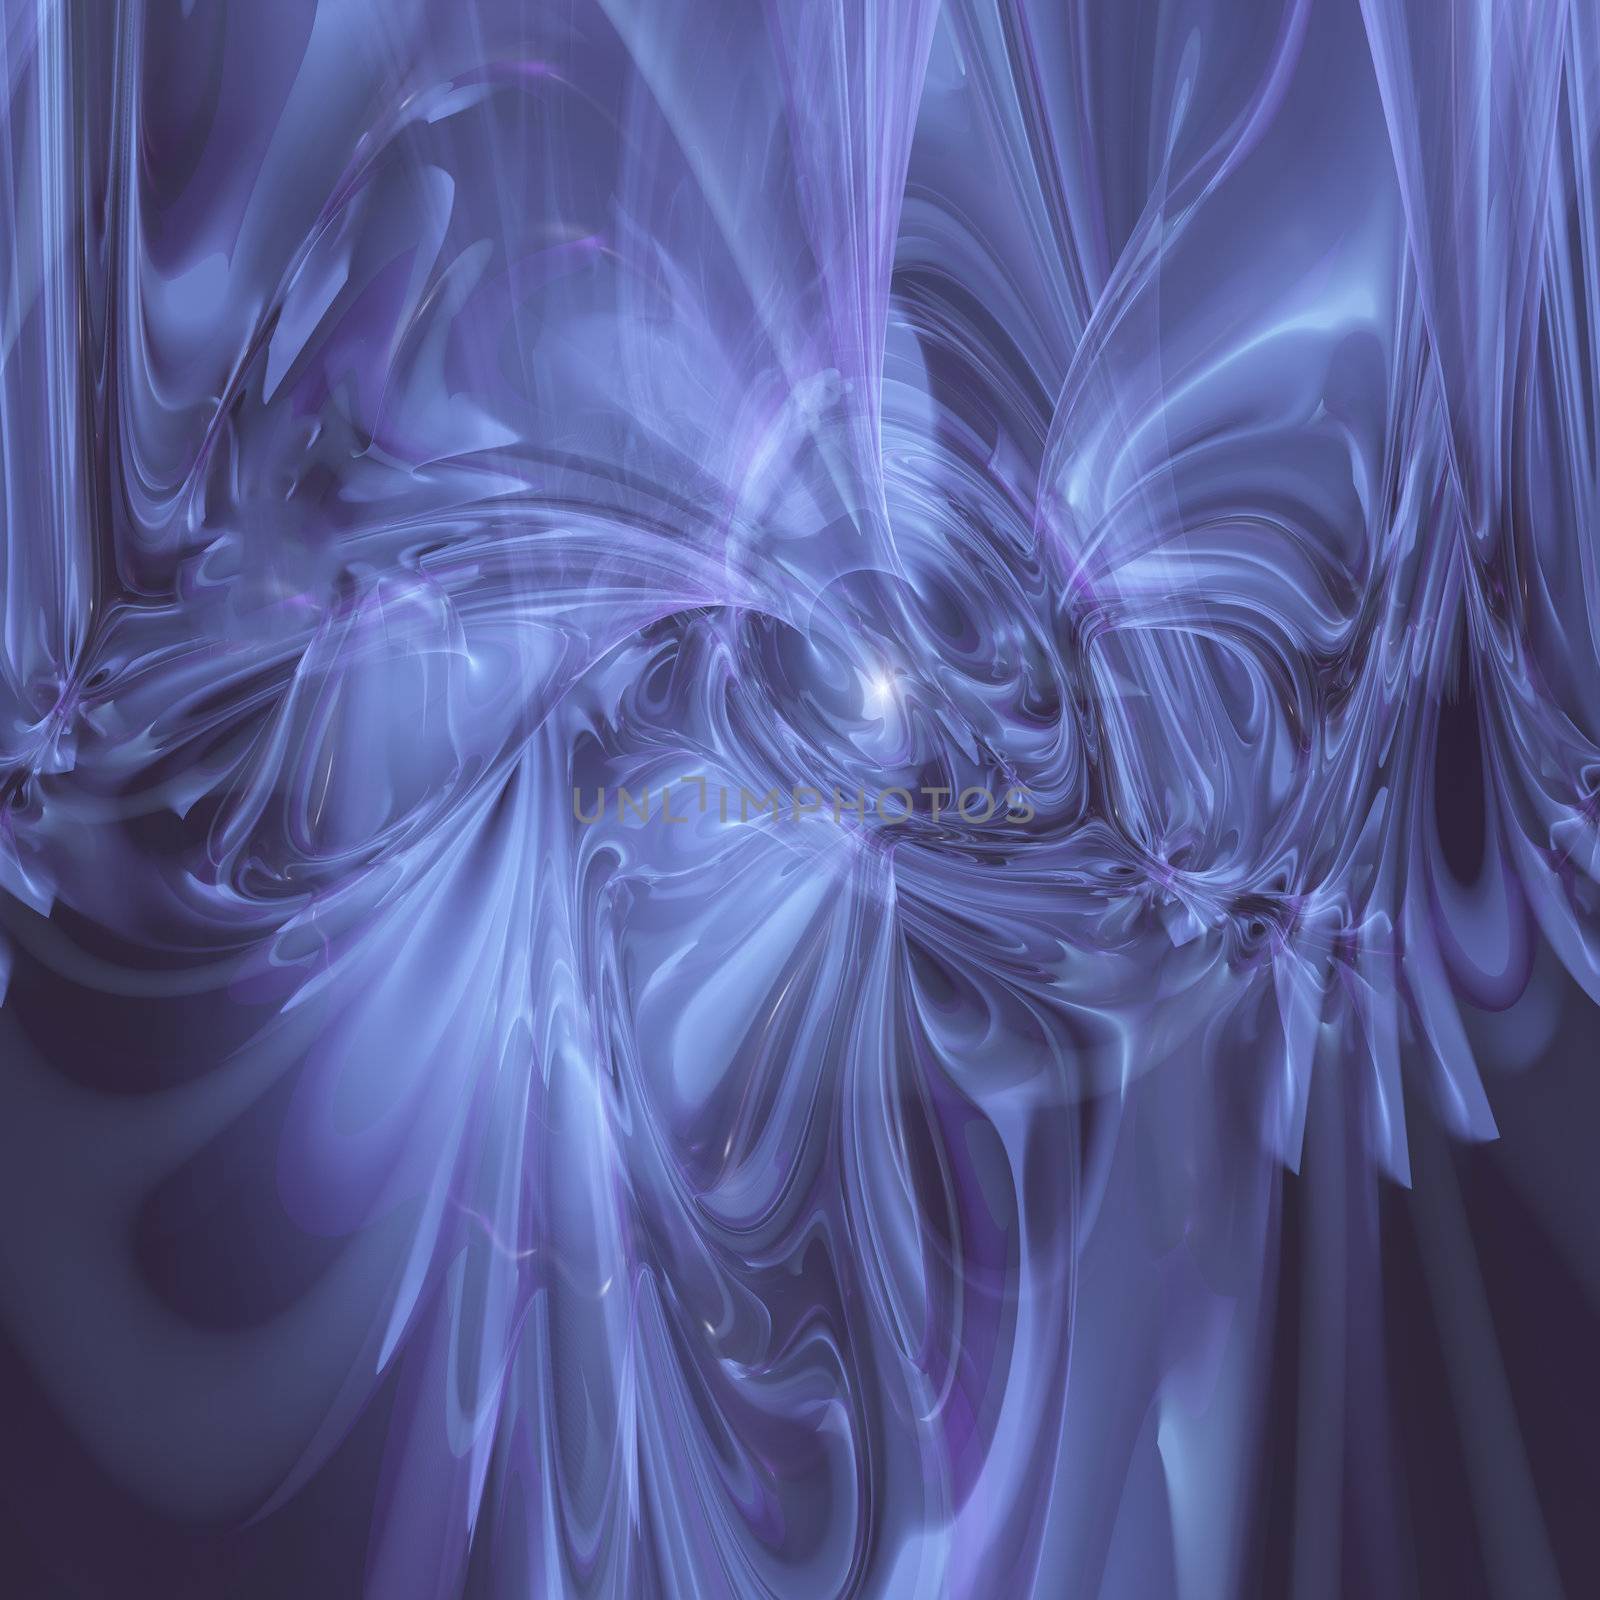 A violet cave of ruffle waves background.